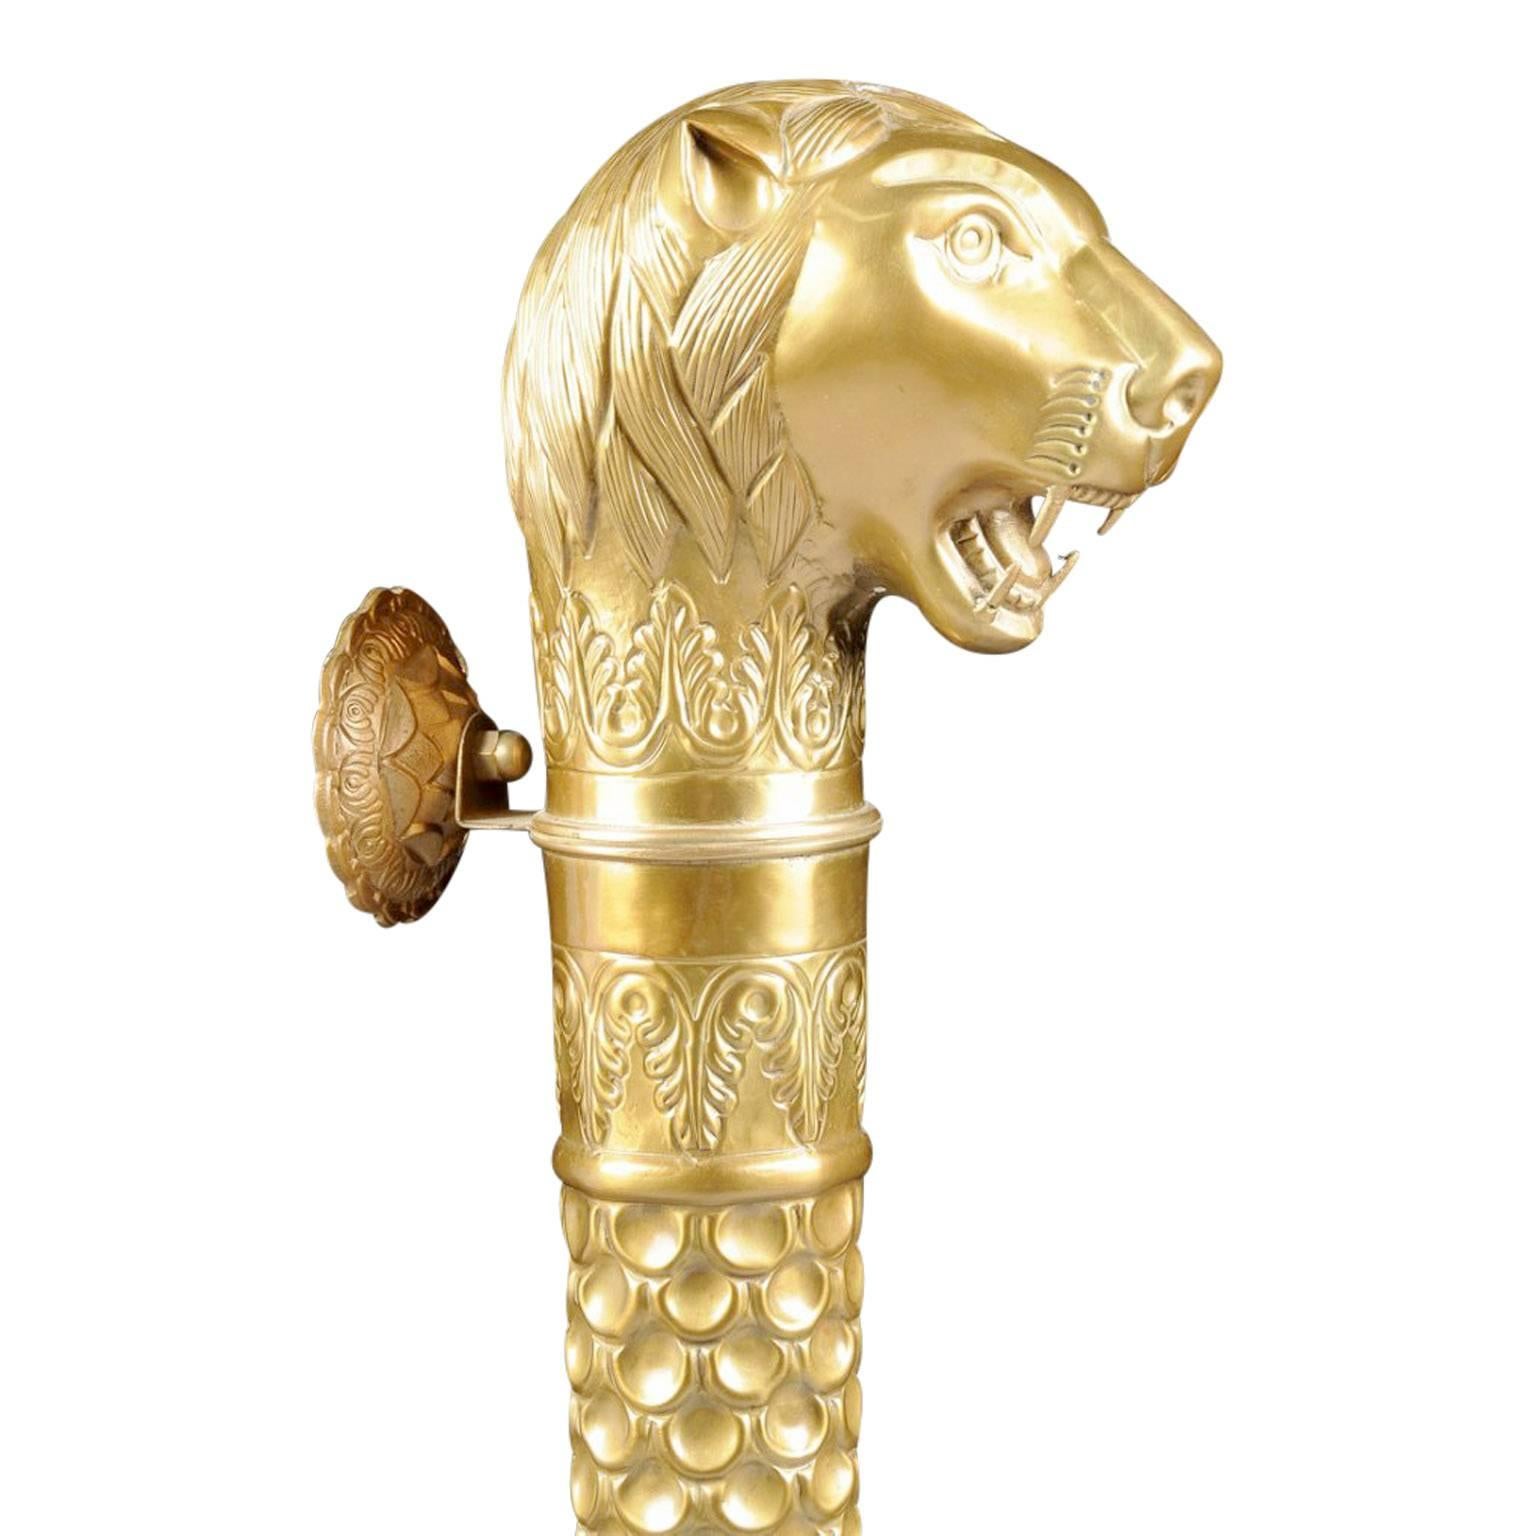 Large and majestic repoussé brass lion head door handle in the Mughal style. Consisting of a tapered circular form with a proud roaring lion's head finial which is set above scrolling leaf banding followed by sectioned panels comprised of circular